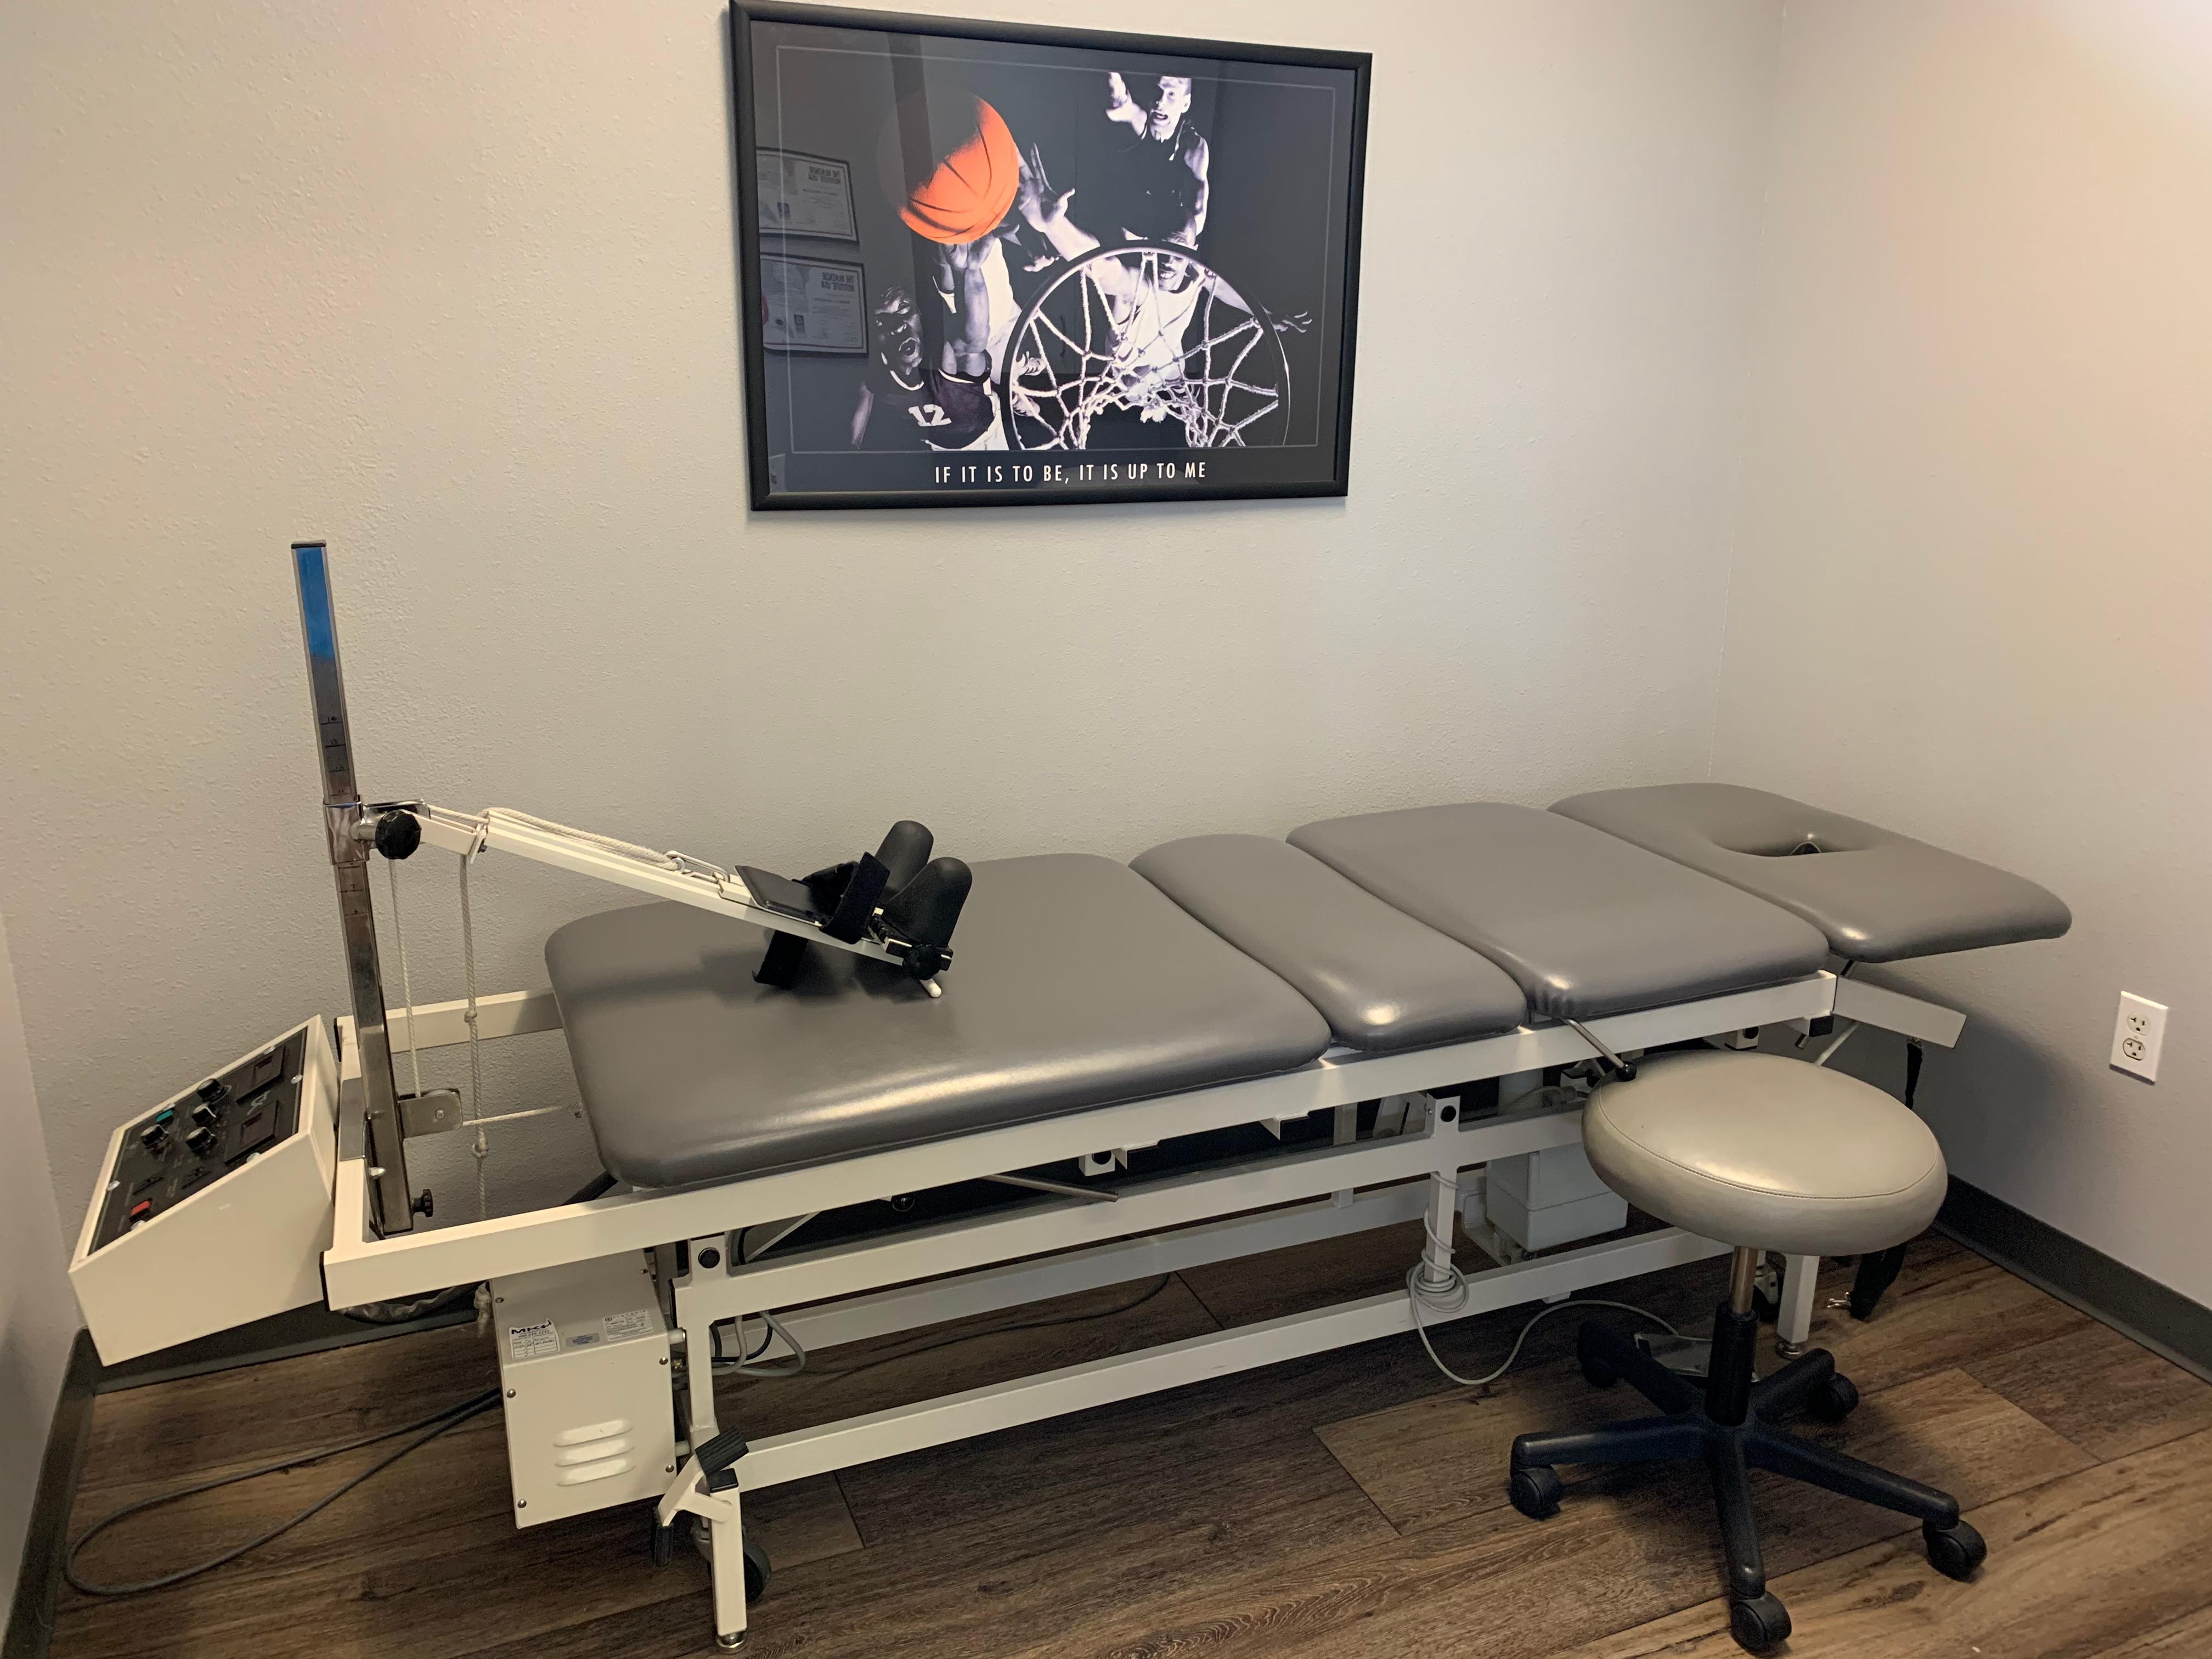 Yorba Linda Physical Therapy is a proud affiliate of California Rehabilitation and Sports Therapy located at
16615 Yorba Linda Blvd., Yorba Linda, CA